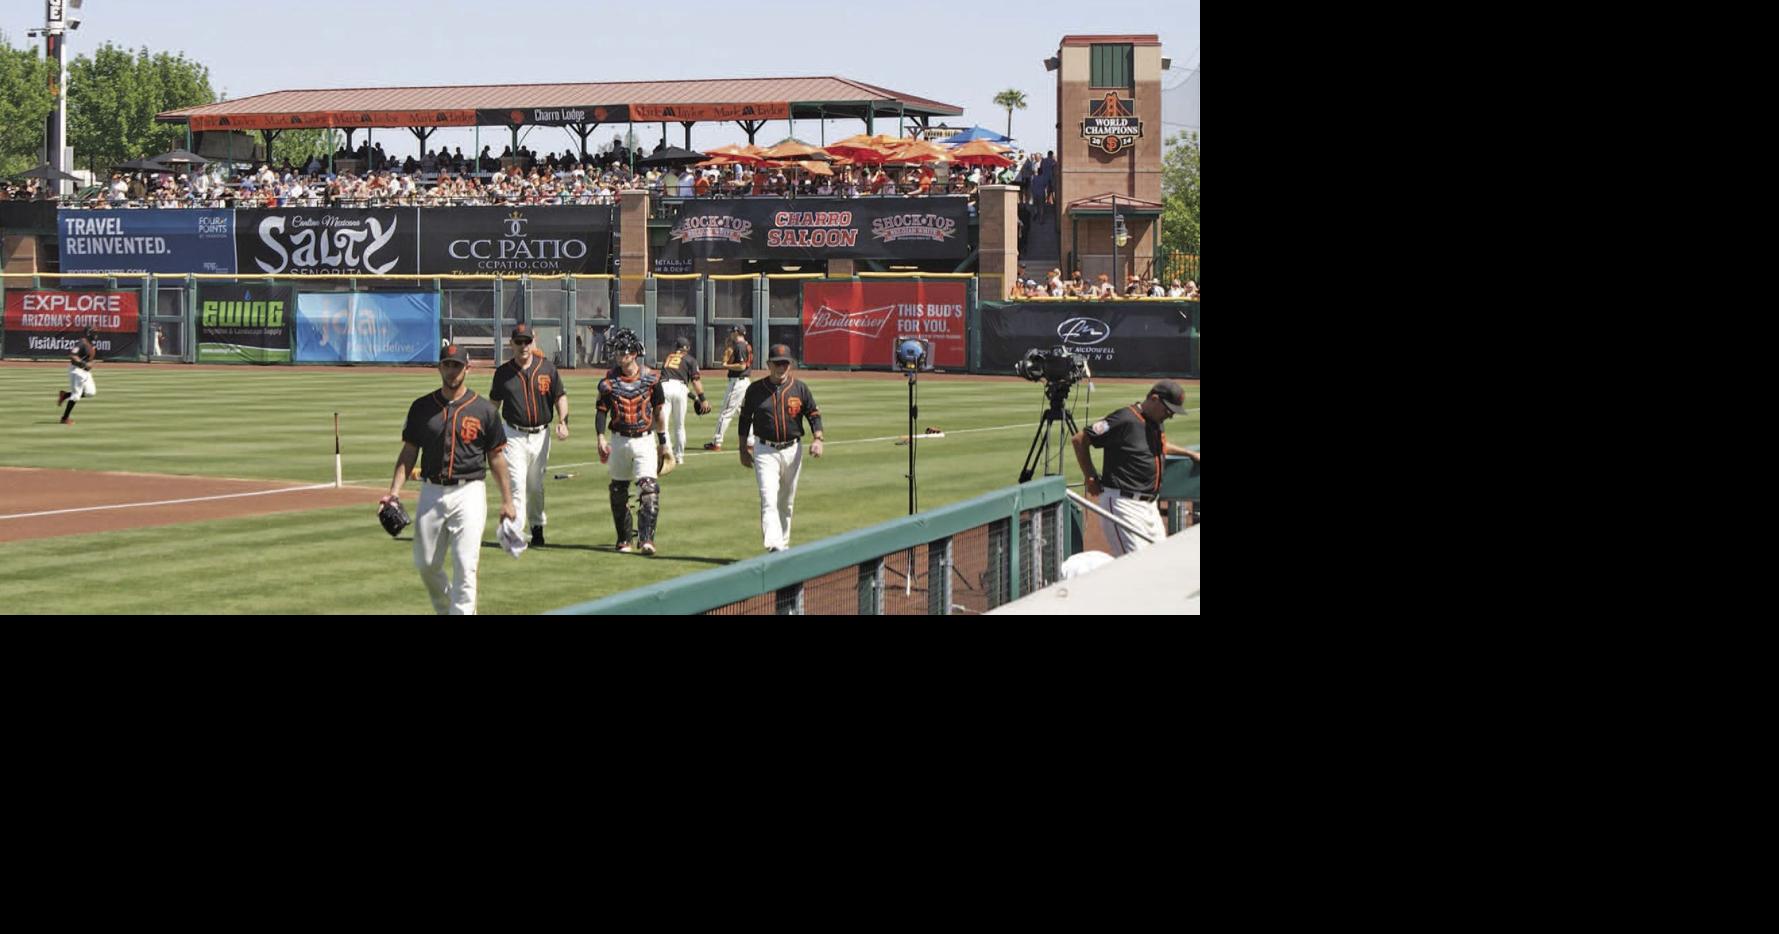 The Game Plan for Scottsdale Stadium Renovations: Shade, Expansion